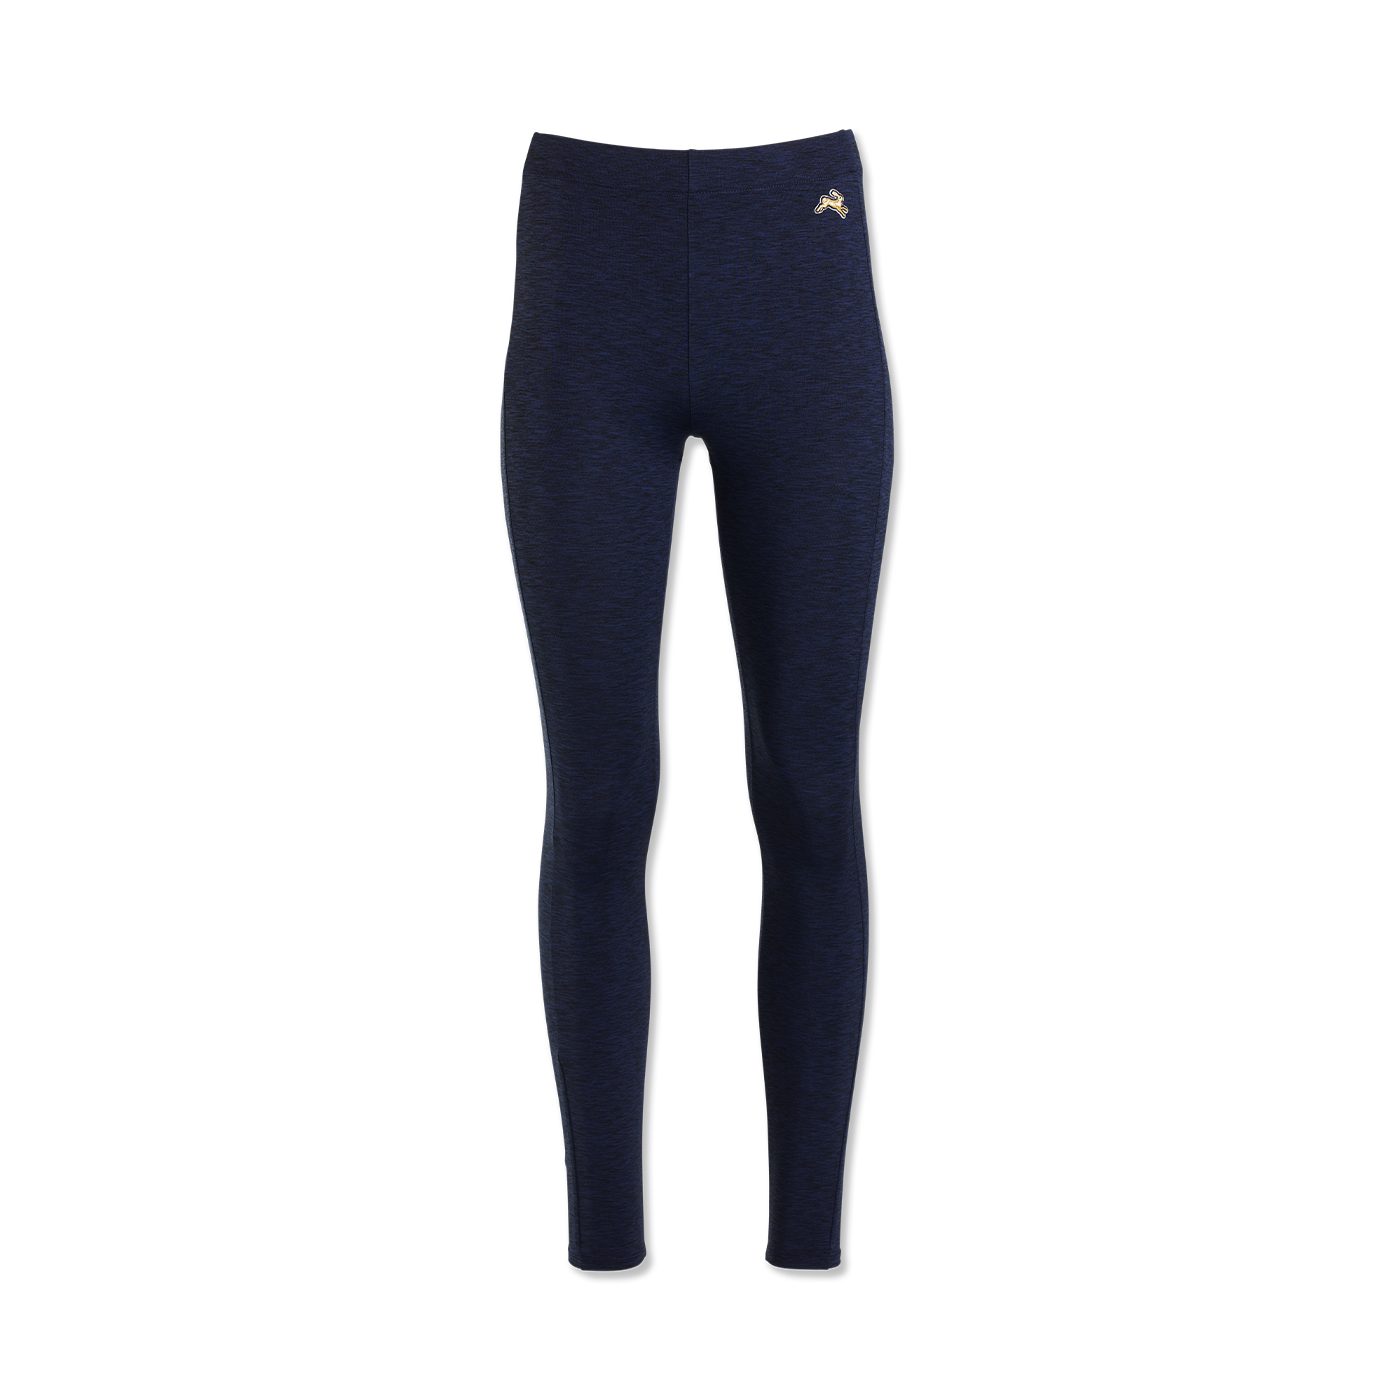 https://cdn.shopify.com/s/files/1/1594/4353/products/Spring21-Womens-Session-Tight-Navy-On-Model_2c2d8609-a594-48dc-81b6-63e00095754c.png?v=1664361261?q=50&auto=format&dpr=1&w=800&h=450&fit=crop